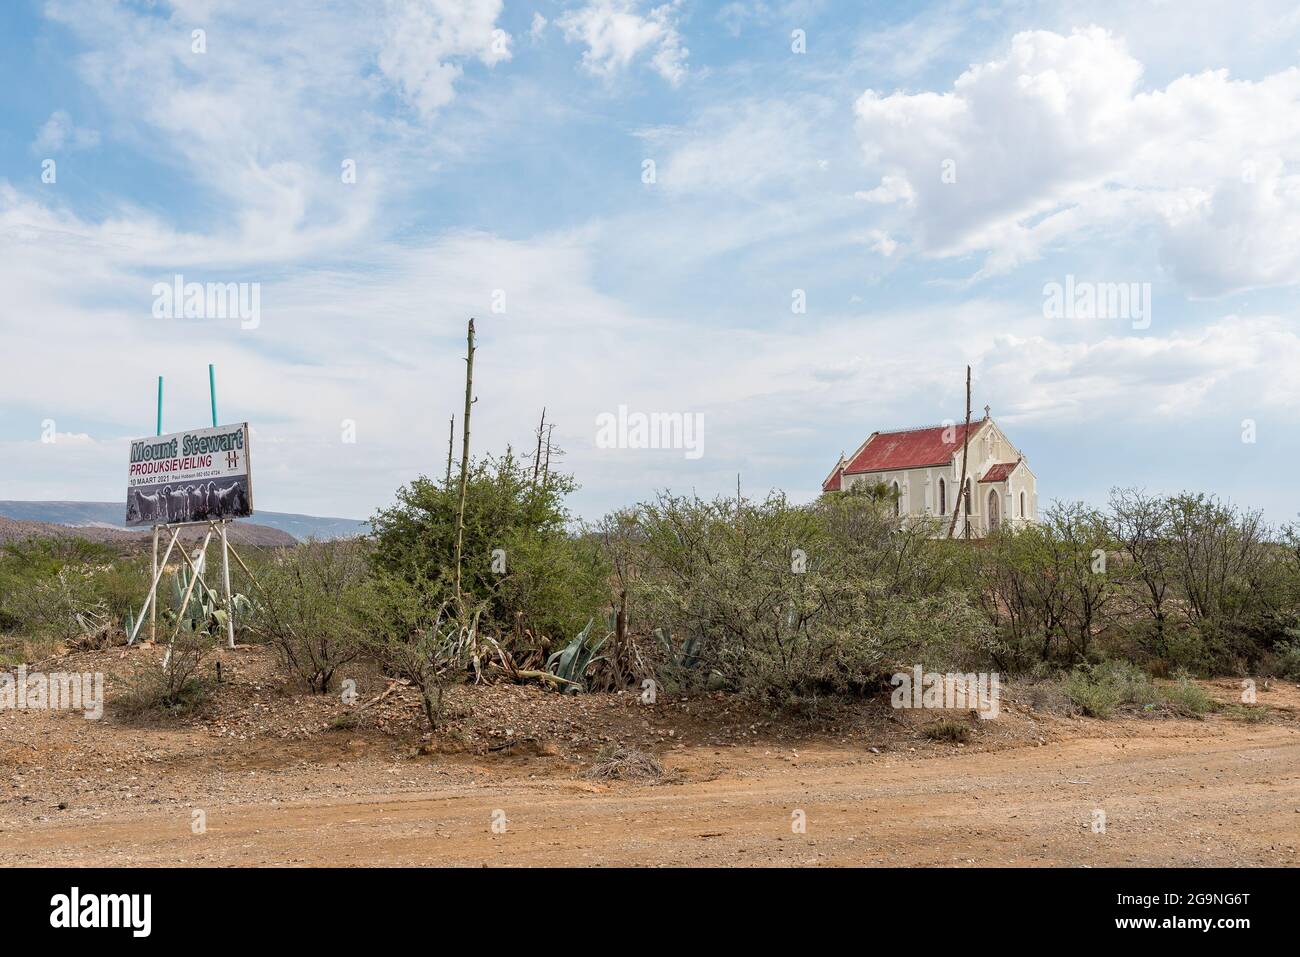 MOUNT STEWART, SOUTH AFRICA - APRIL 21, 2021: A scene in Mount Stewart in the Eastern Cape Province. The community church and an auction advertisement Stock Photo